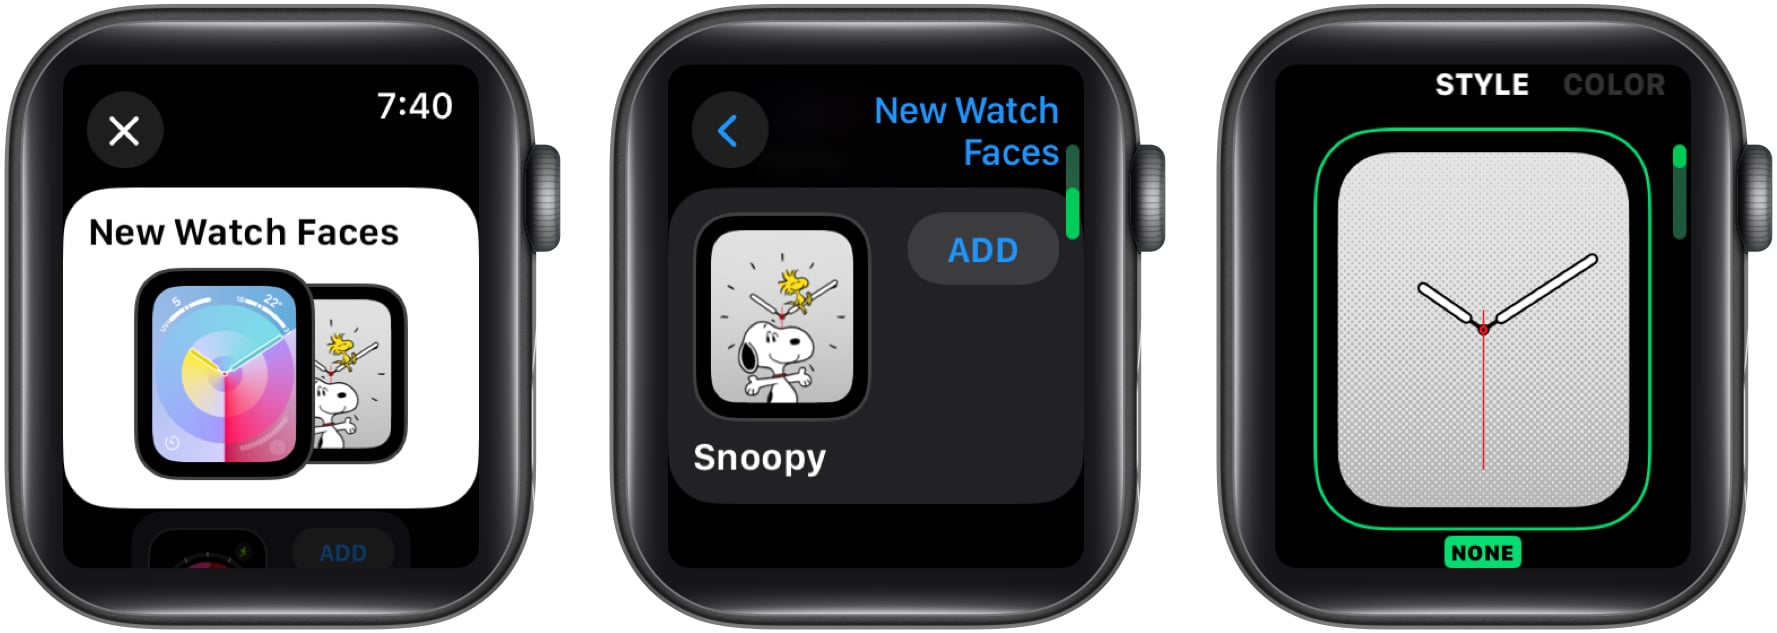 Choose New Watch Faces, scroll down and tap Add next to the Snoopy face, and customize the colors and style by swiping left and rotating the Digital Crown